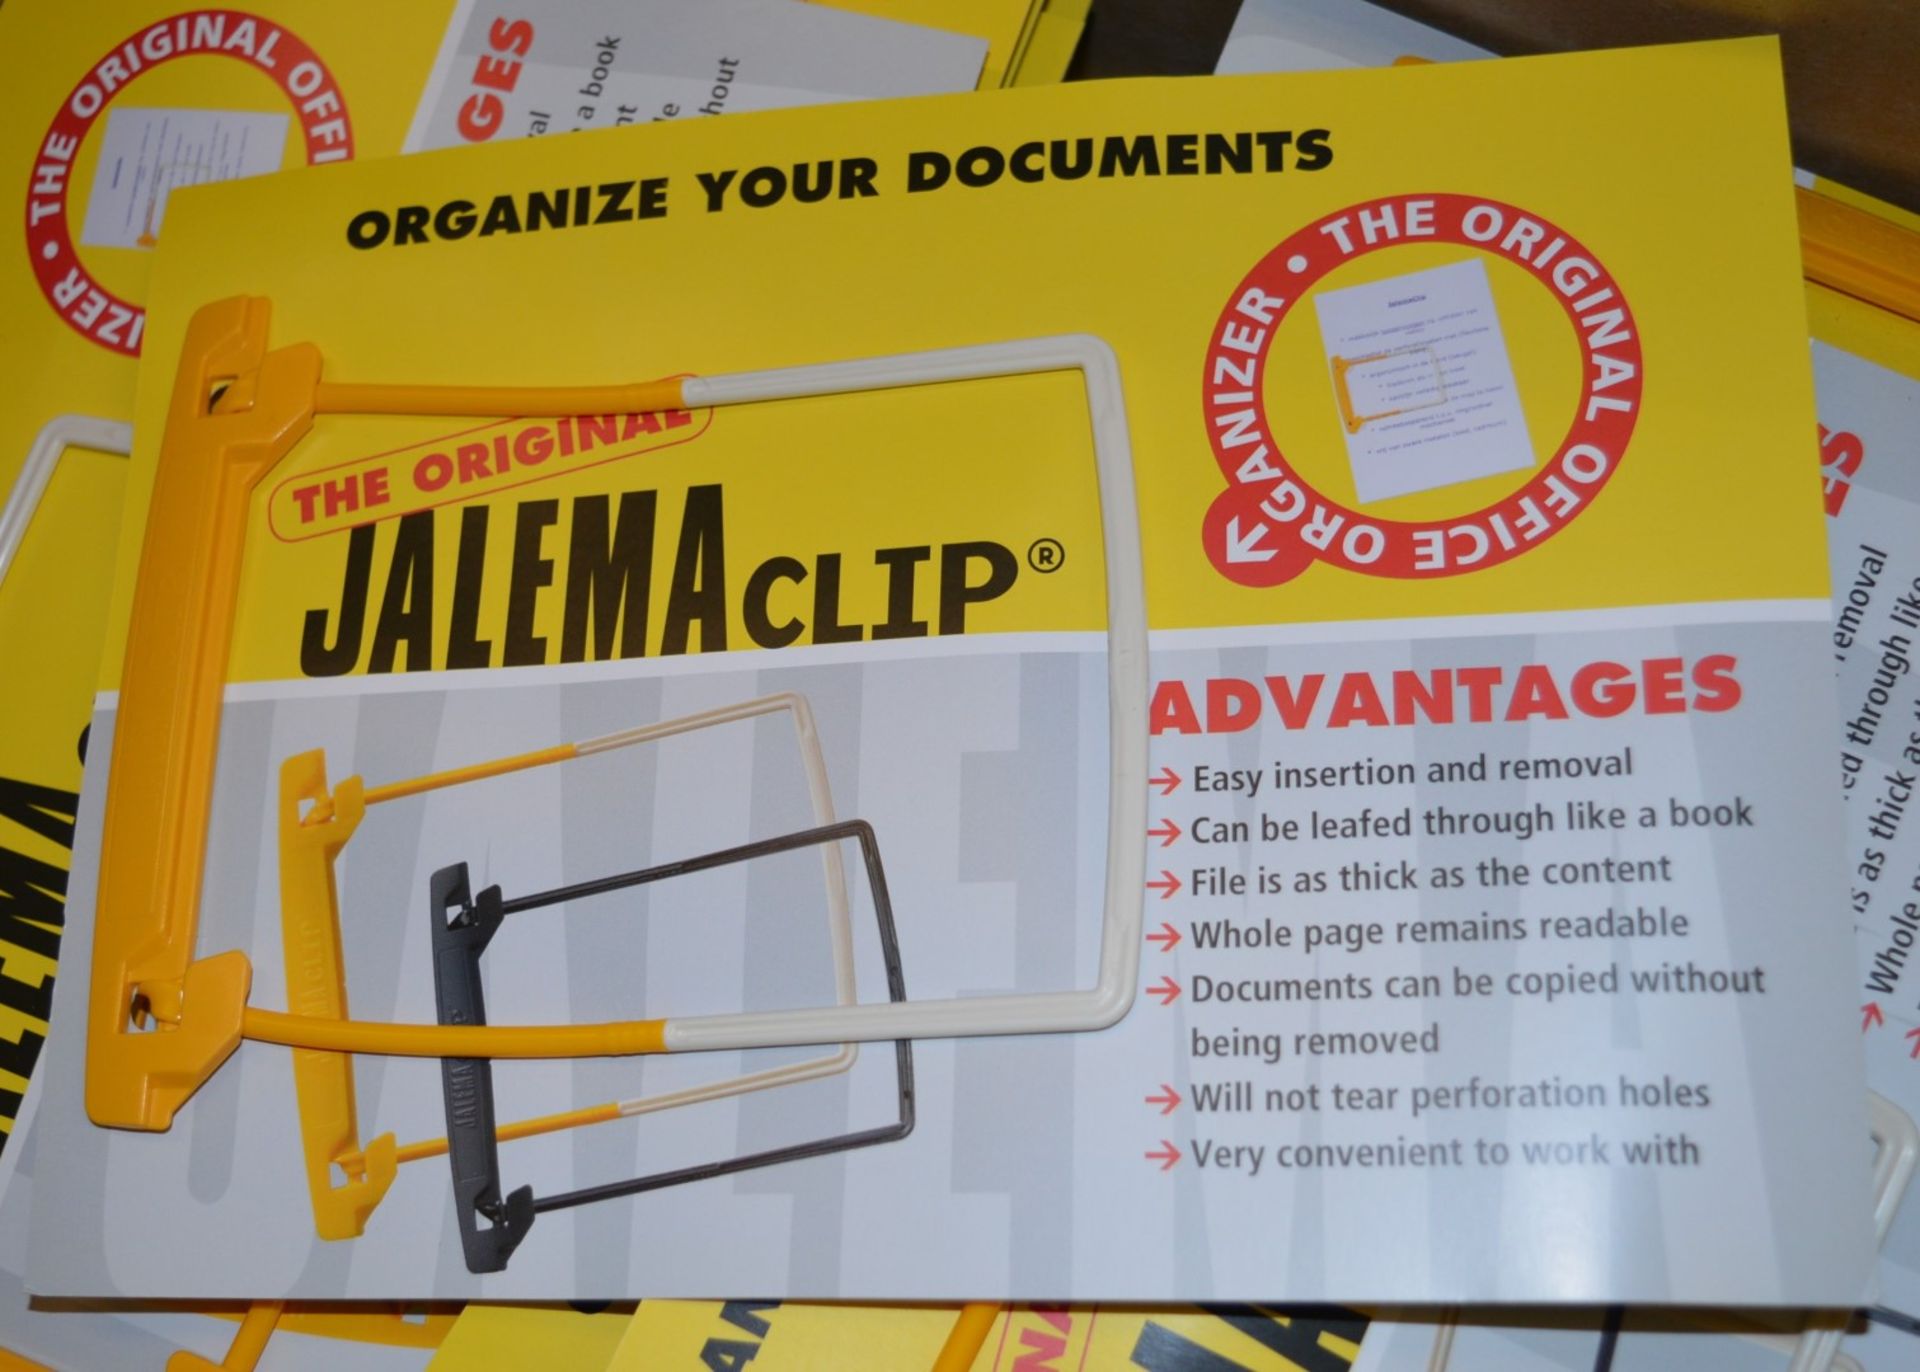 80 x Jalema Clips - Fleixble Fastener For Organising Your Documents - Brand New Stock - CL185 -